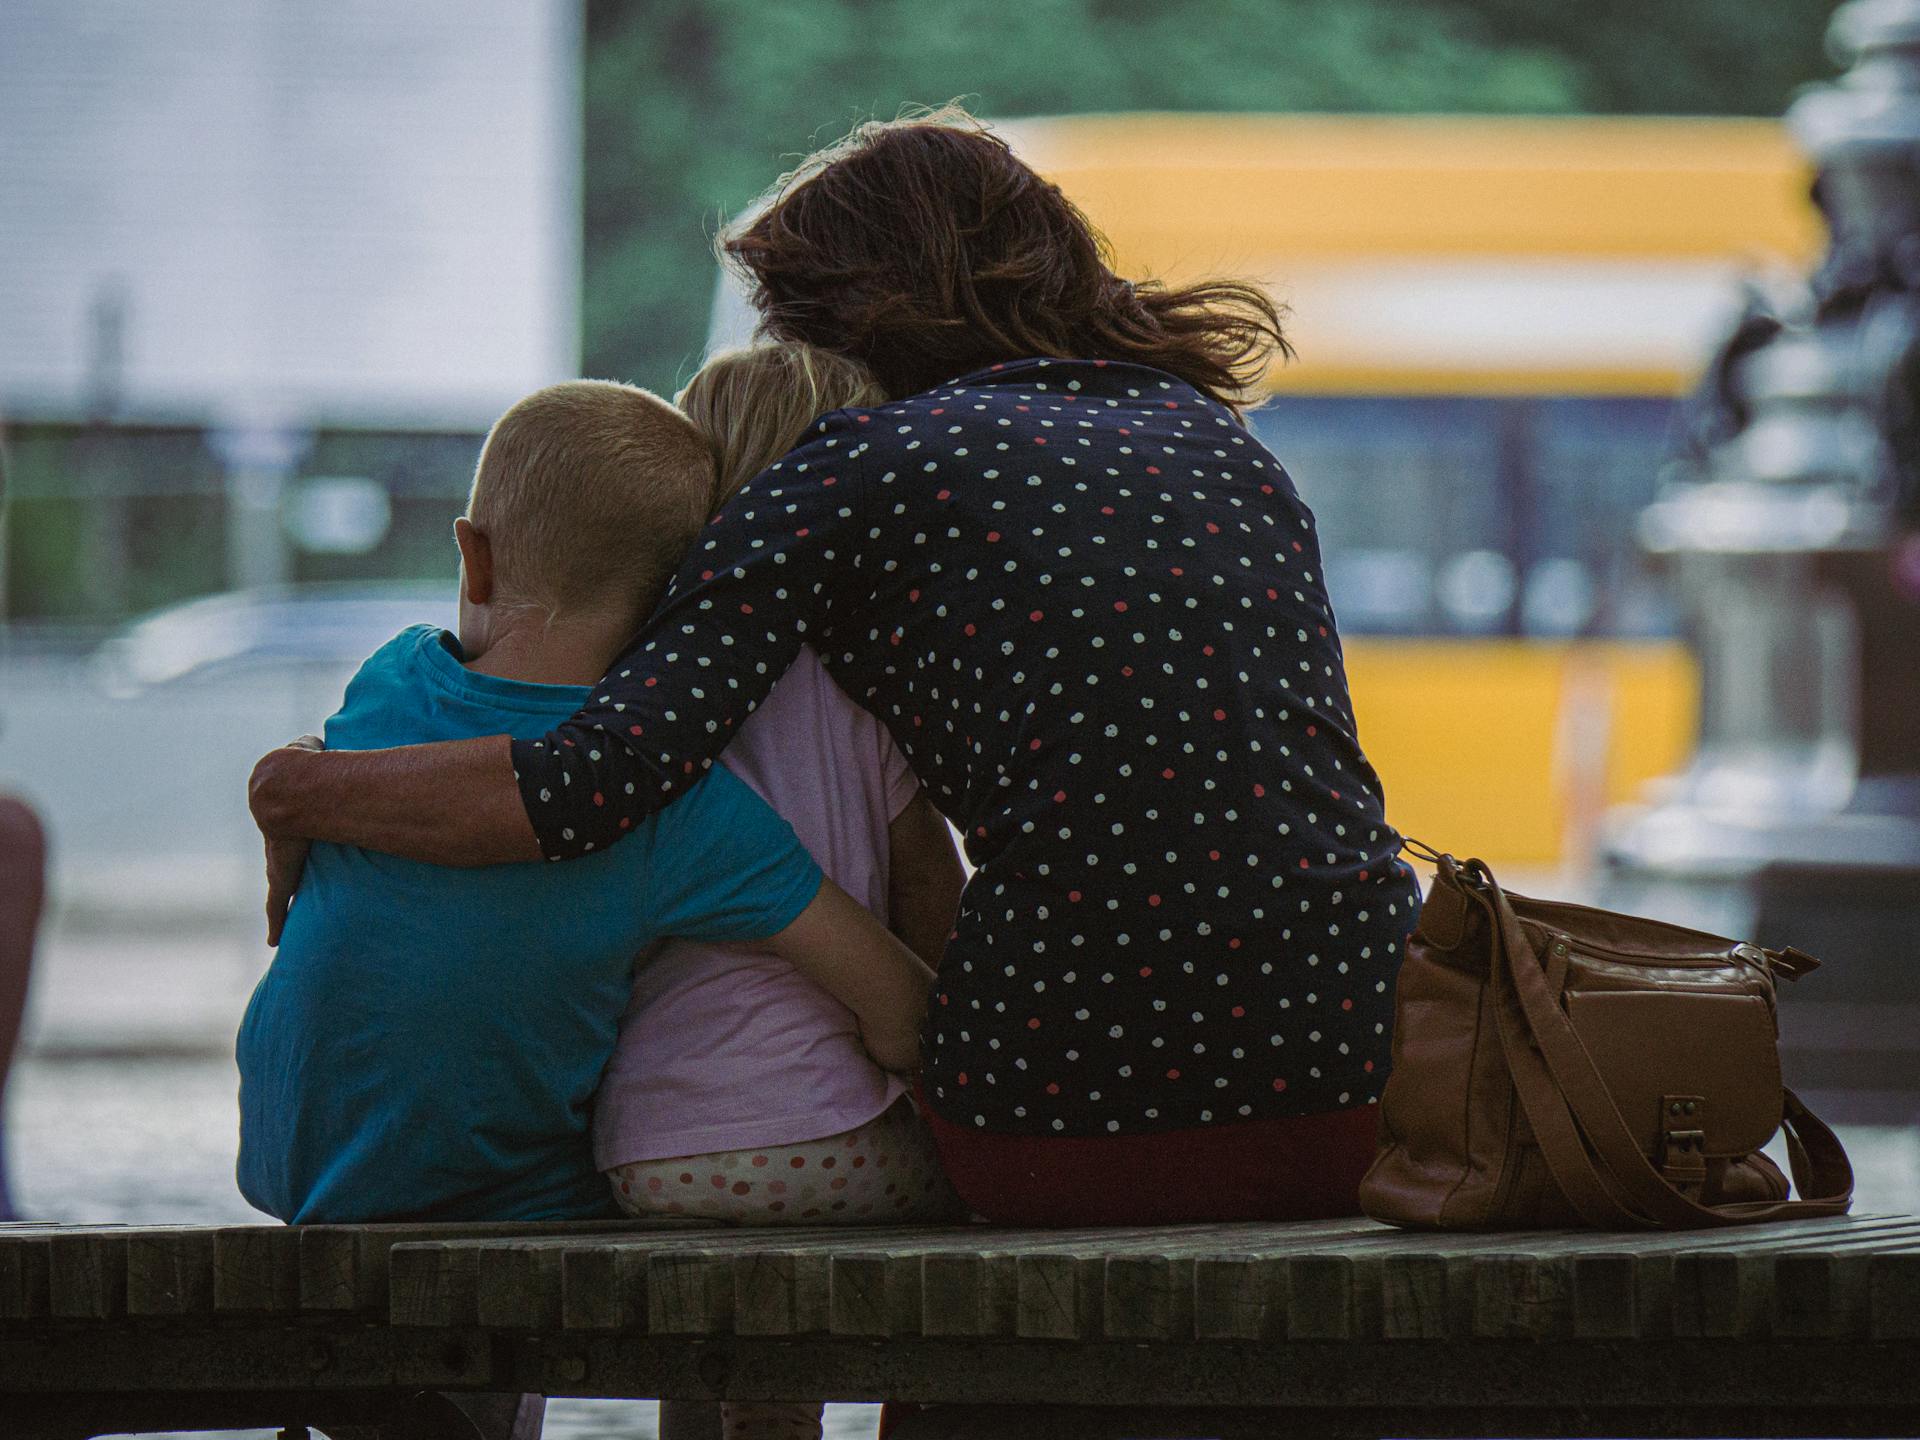 A back view shot of a woman hugging her kids while sitting on a bench | Source: Pexels